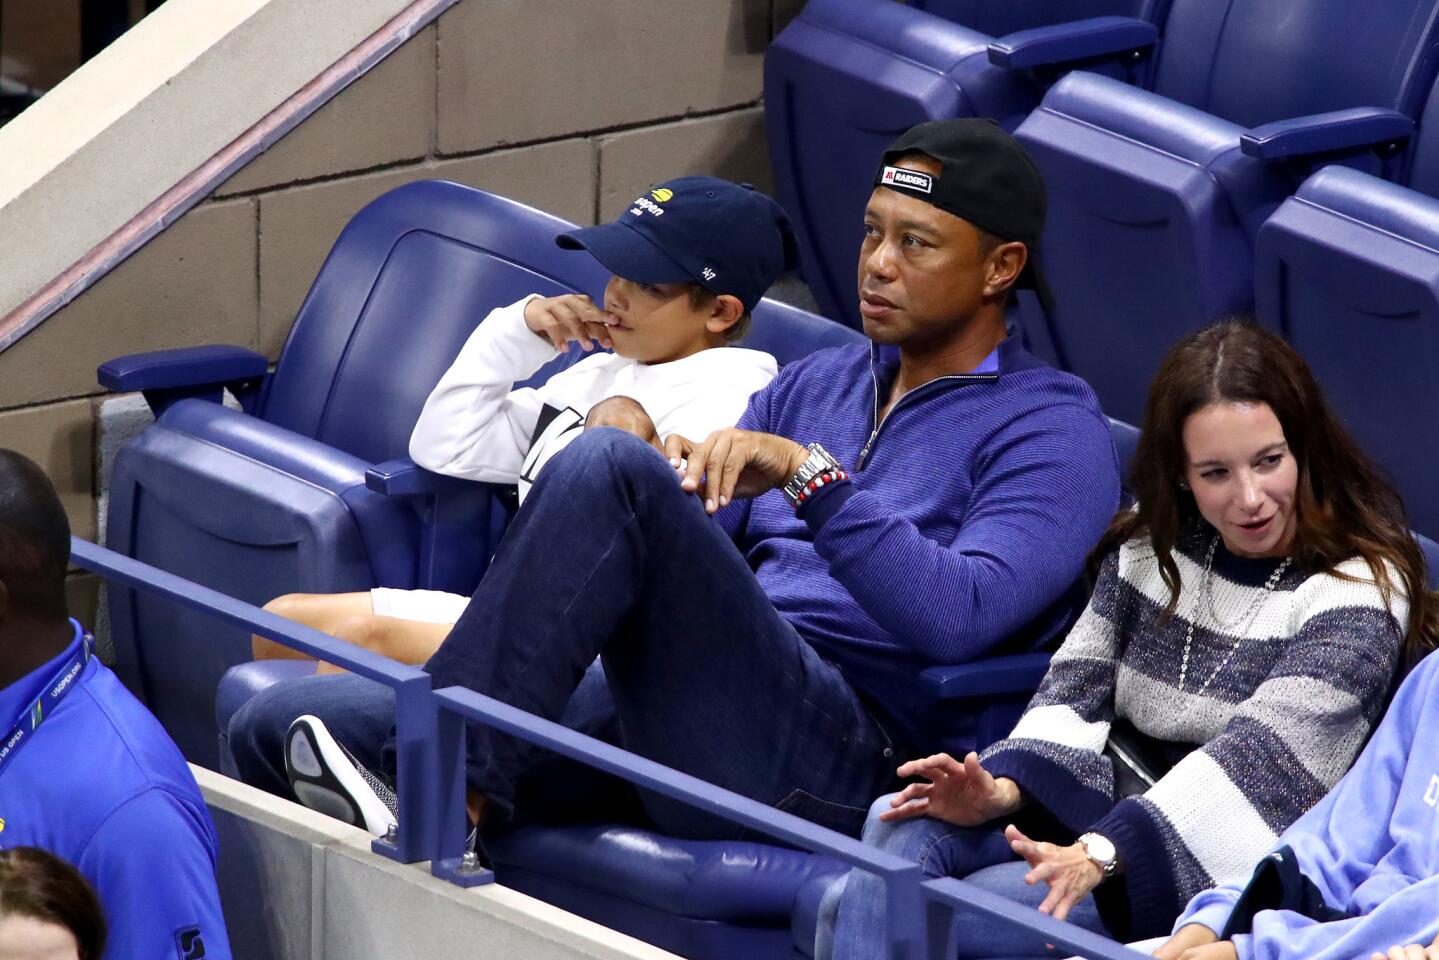 Professional golfer Tiger Woods cheers on Rafael Nadal of Spain with his son Charlie at the 2019 U.S. Open in Queens on Monday, Sept. 2, 2019.